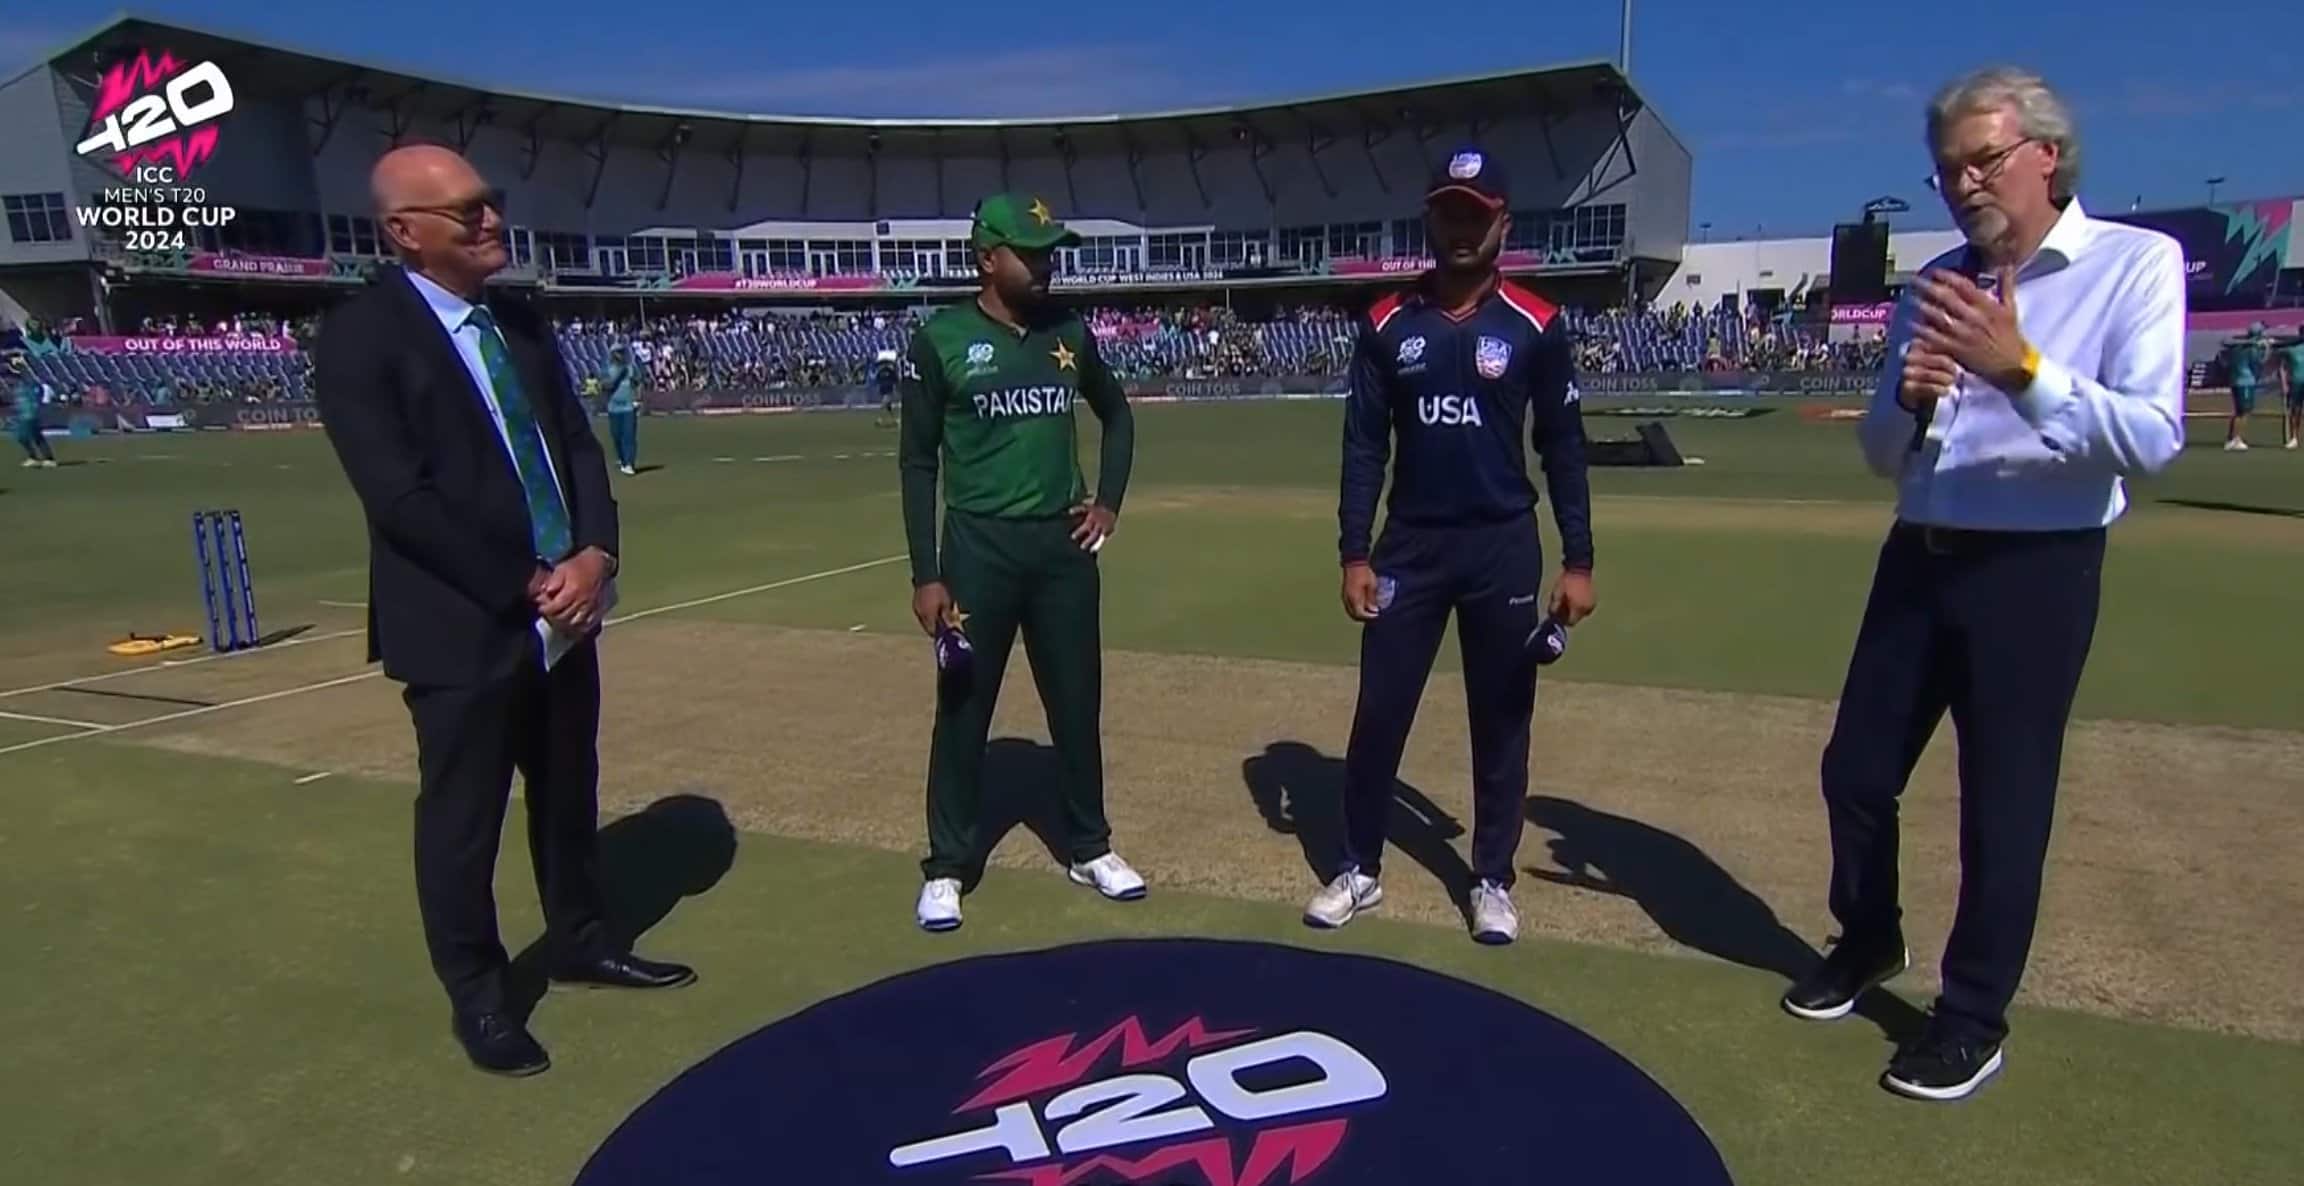 USA won the toss and opted to bowl first [X.com]